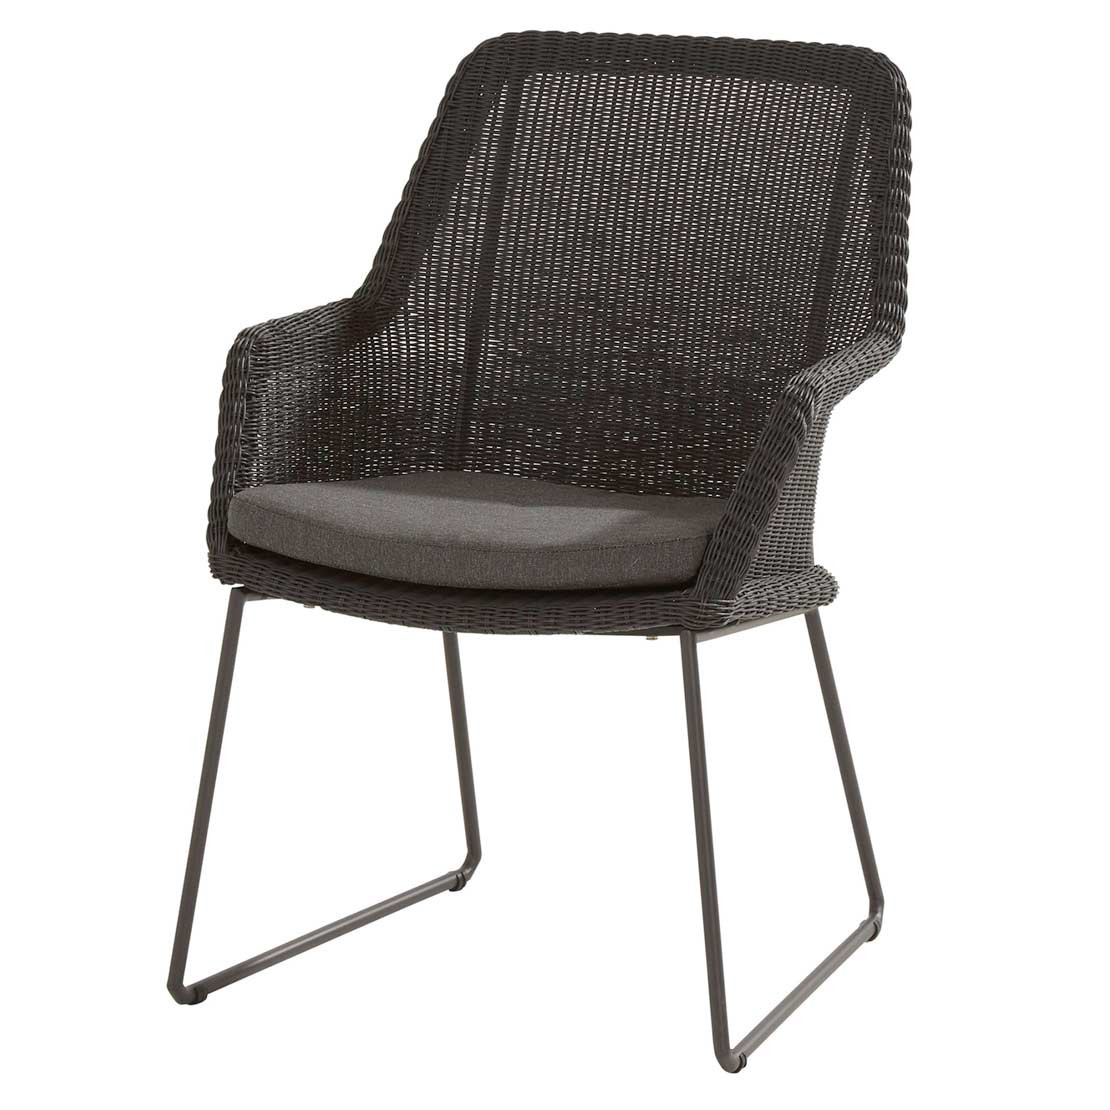 Samoa dining chair Ecoloom Anthracite with cushion